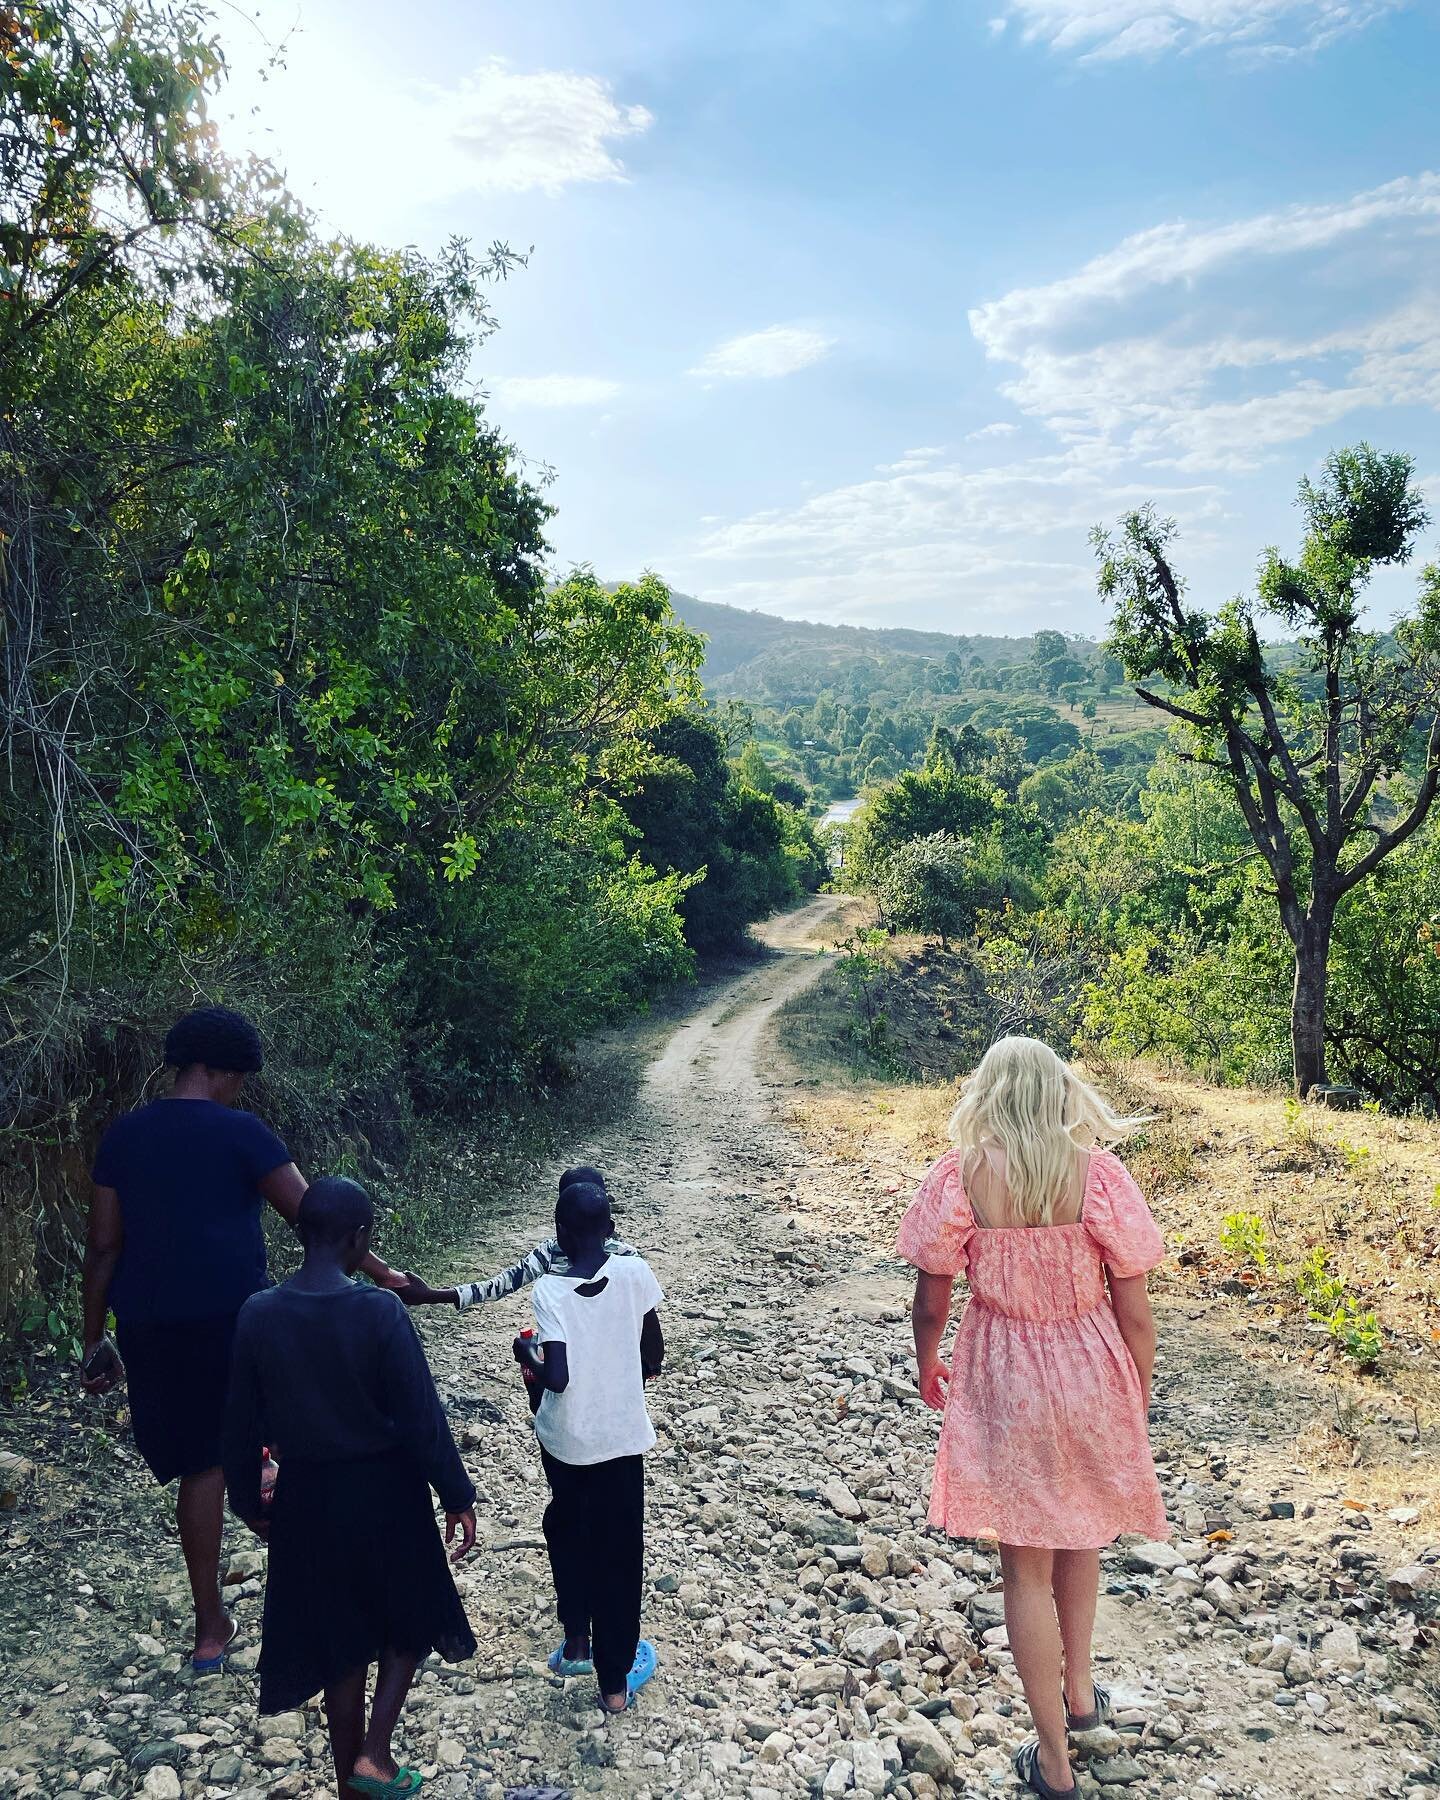 The girl&rsquo;s rescue center is surrounded by beautiful nature and amazing views of the surrounding area. This location was a place we fell in love with immediately as we hoped that the serene surroundings would contribute toward healing of the gir